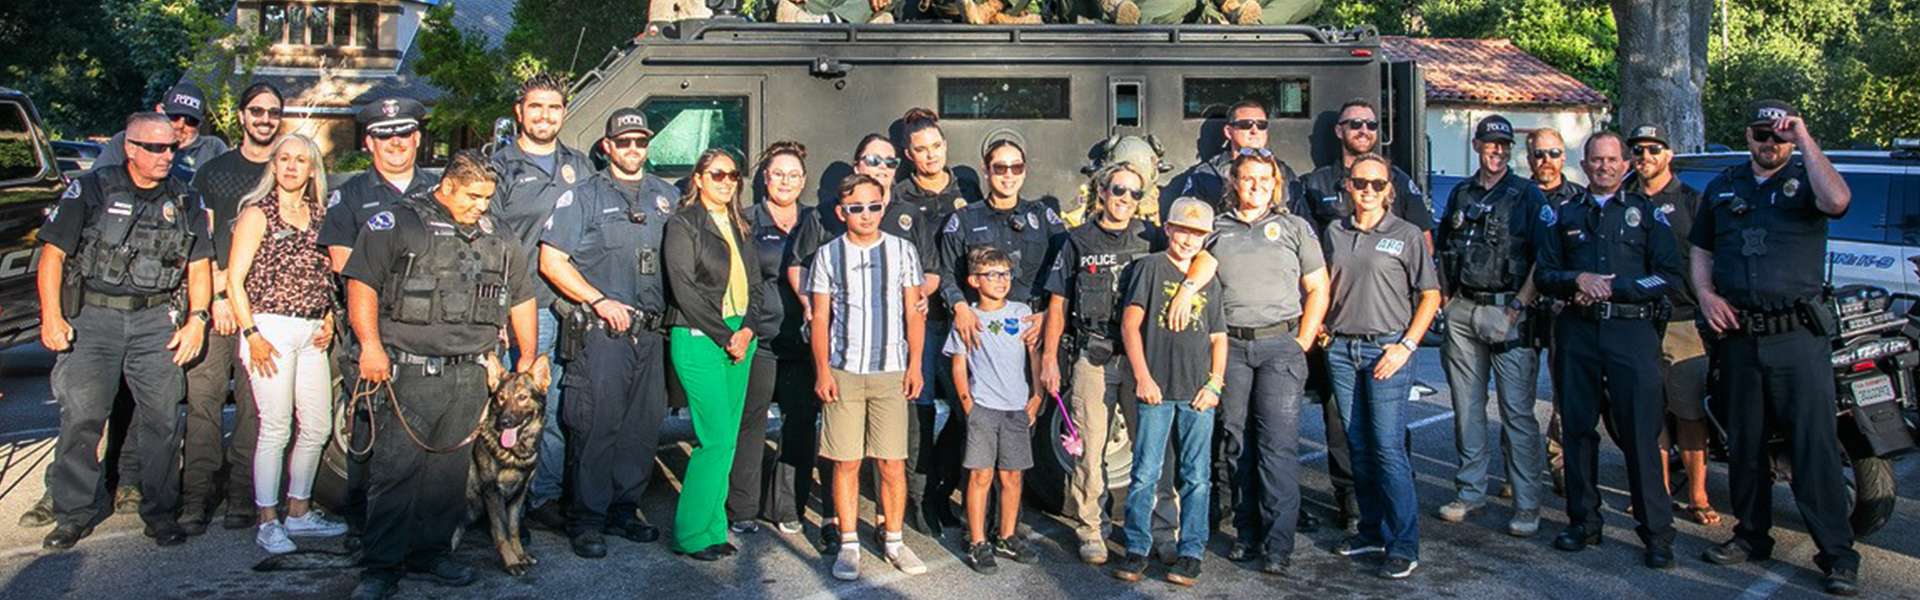 Image of Police Department staff at a National Night Out event.